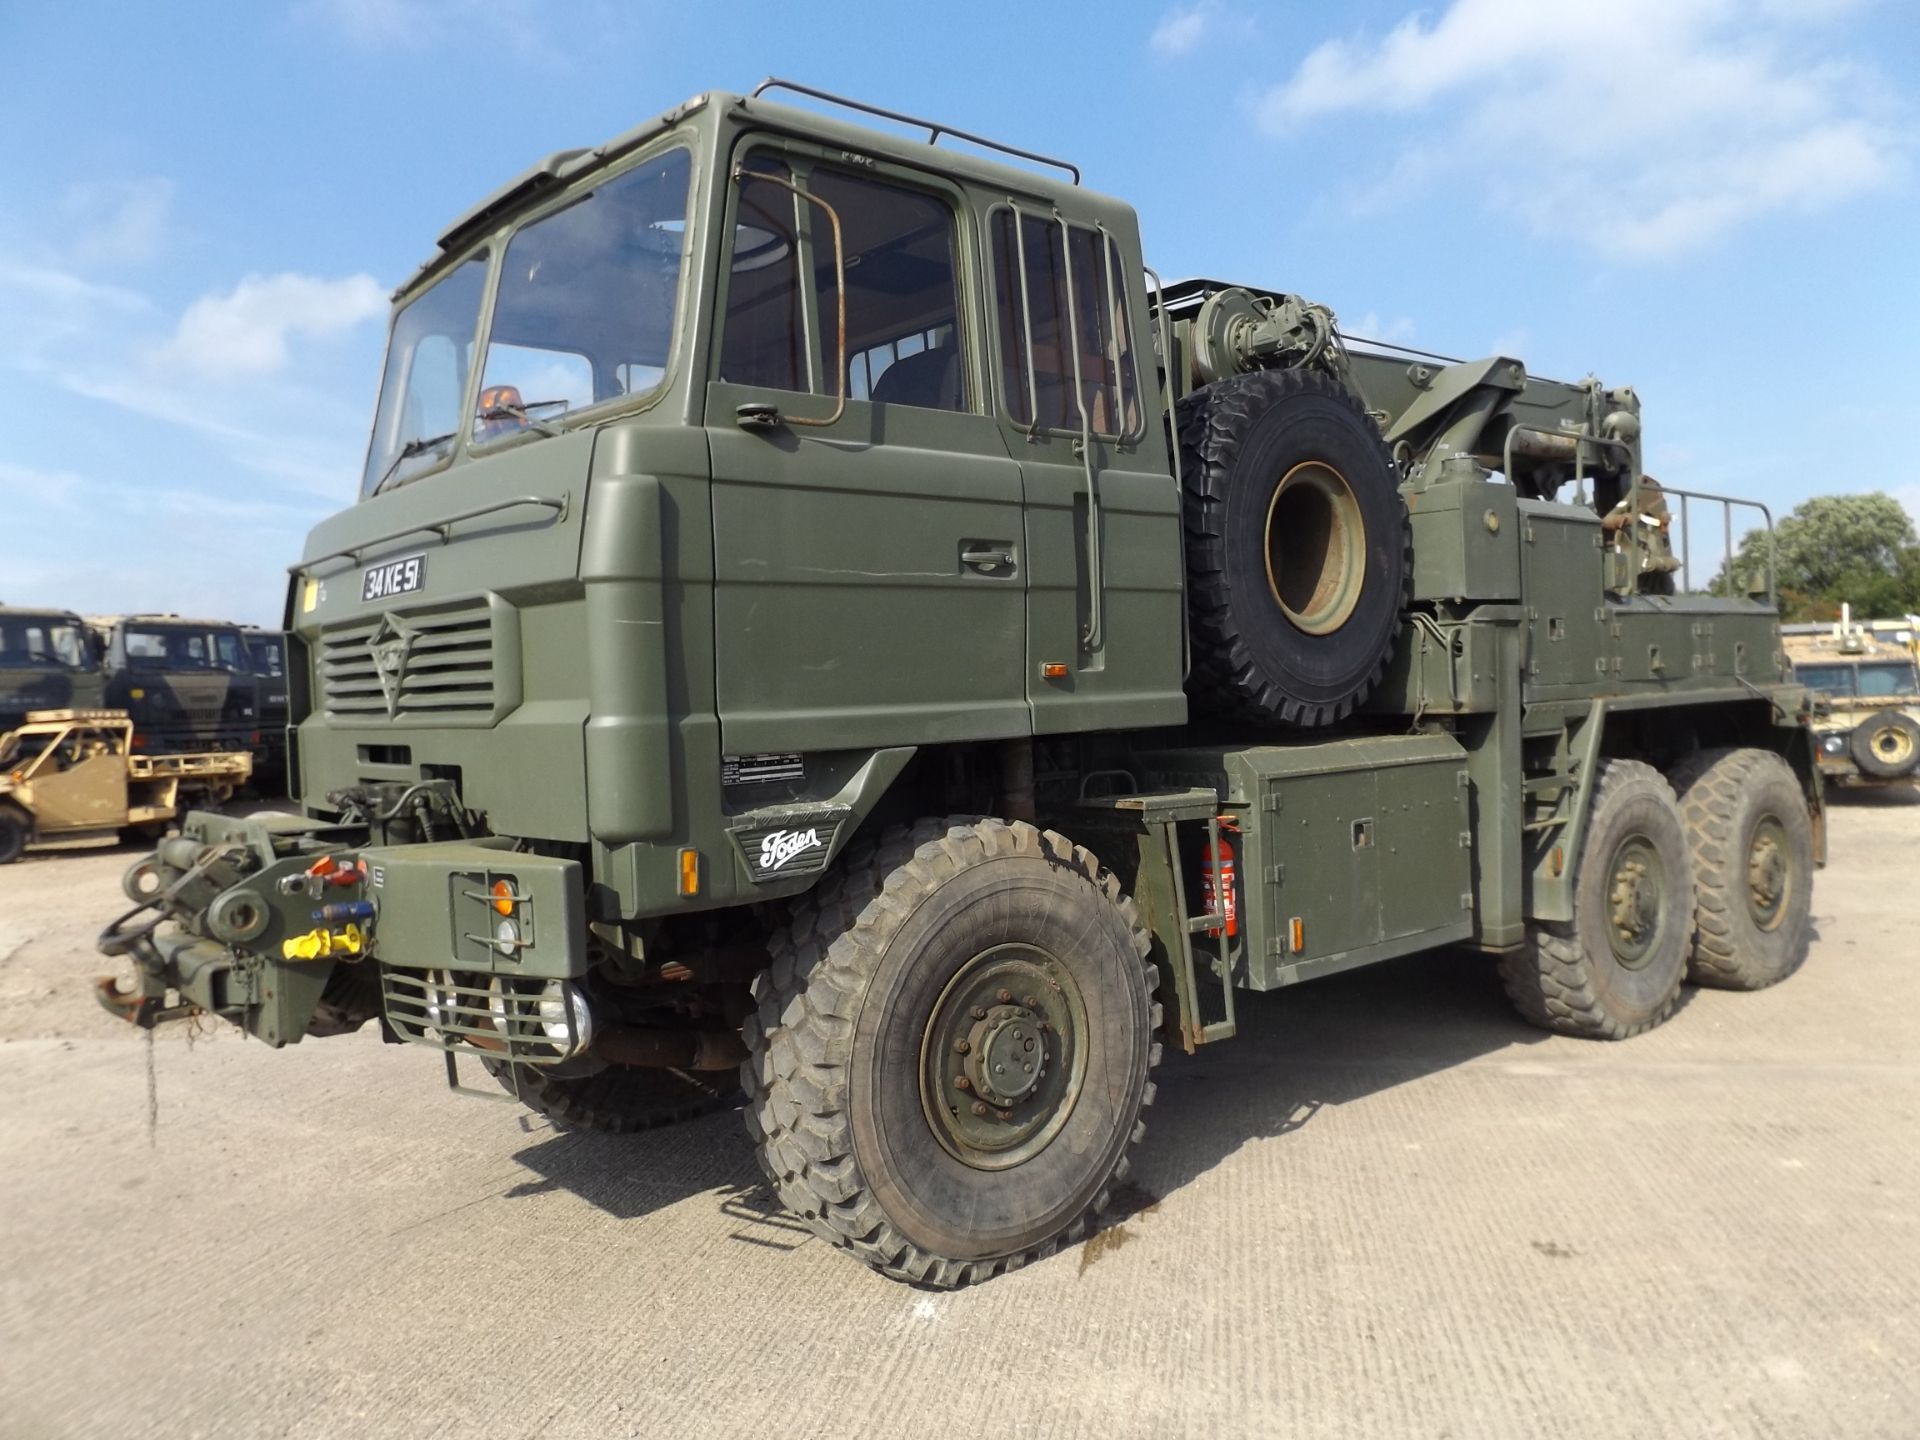 Foden 6x6 Recovery Vehicle which is Complete with Remotes and EKA Recovery Tools - Image 11 of 27